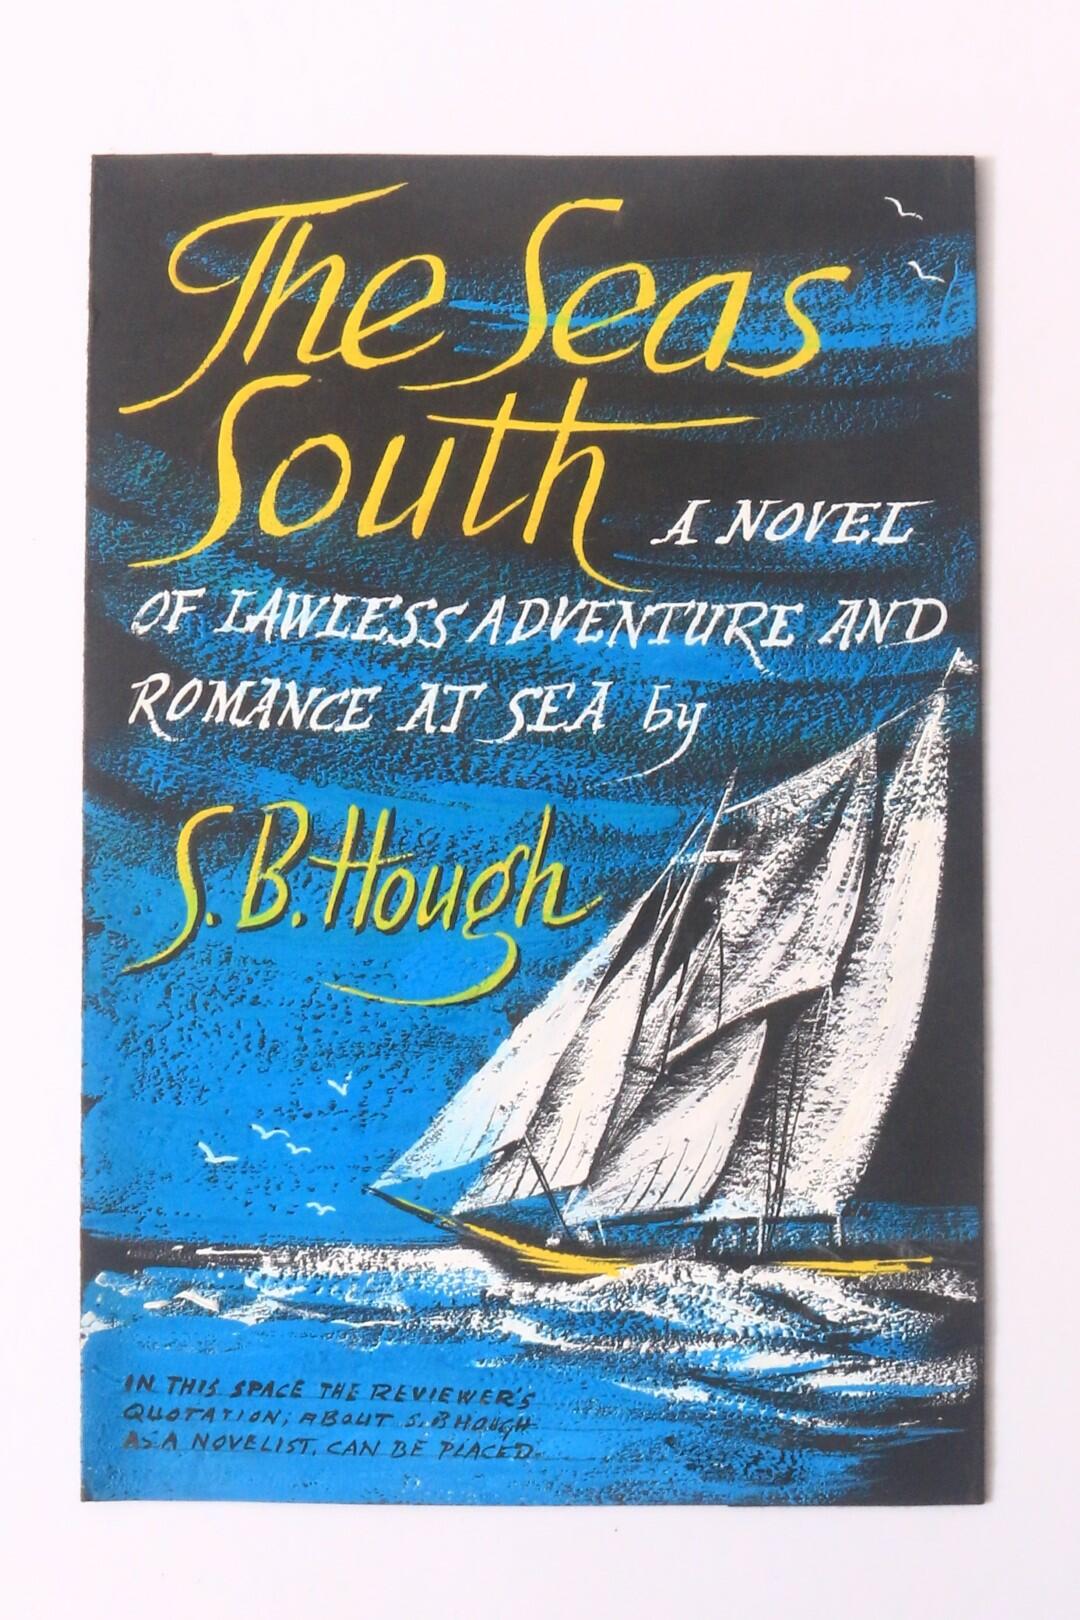 S.B. Hough - The Seas South - Hodder & Stoughton, 1953, First Edition.